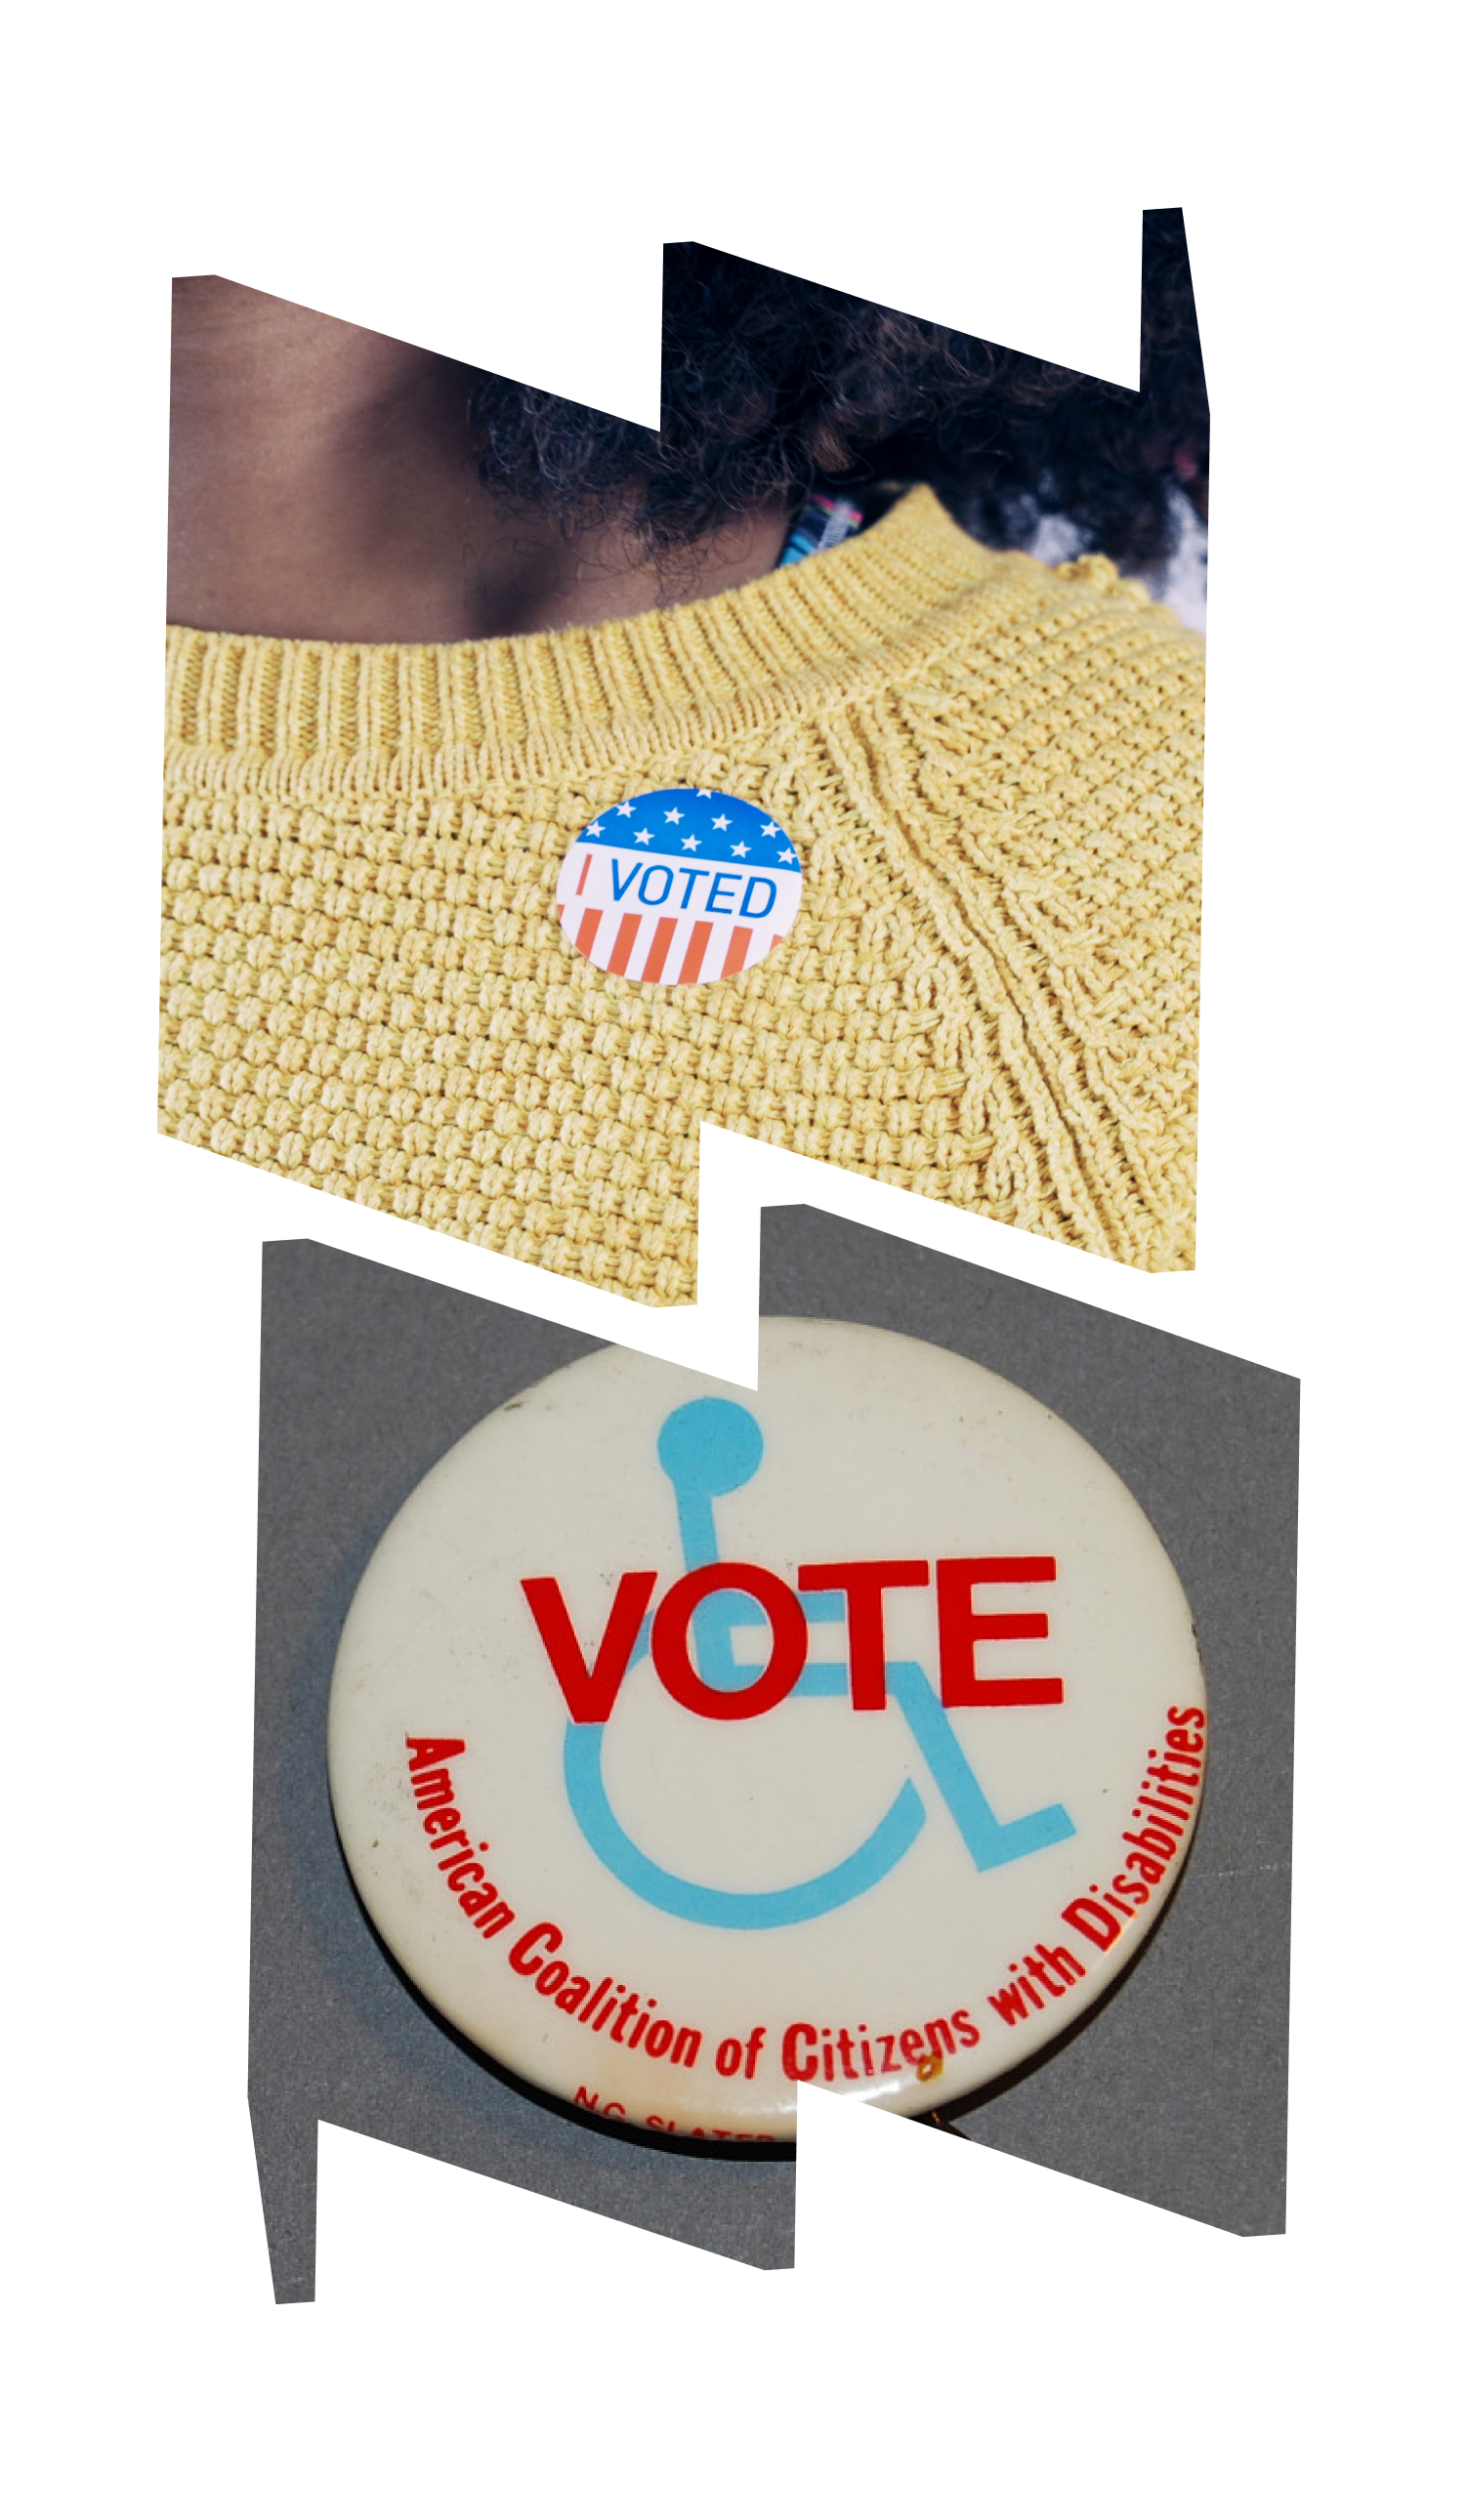 In left "W" frame, image of African American woman's neck and yellow shirt with sticker that says "I Voted"; in right "W" frame, pin-backed button that says "Vote" over graphic of person in wheelchair. Bottom text says "American Coalition of Citizens with Disabilities."